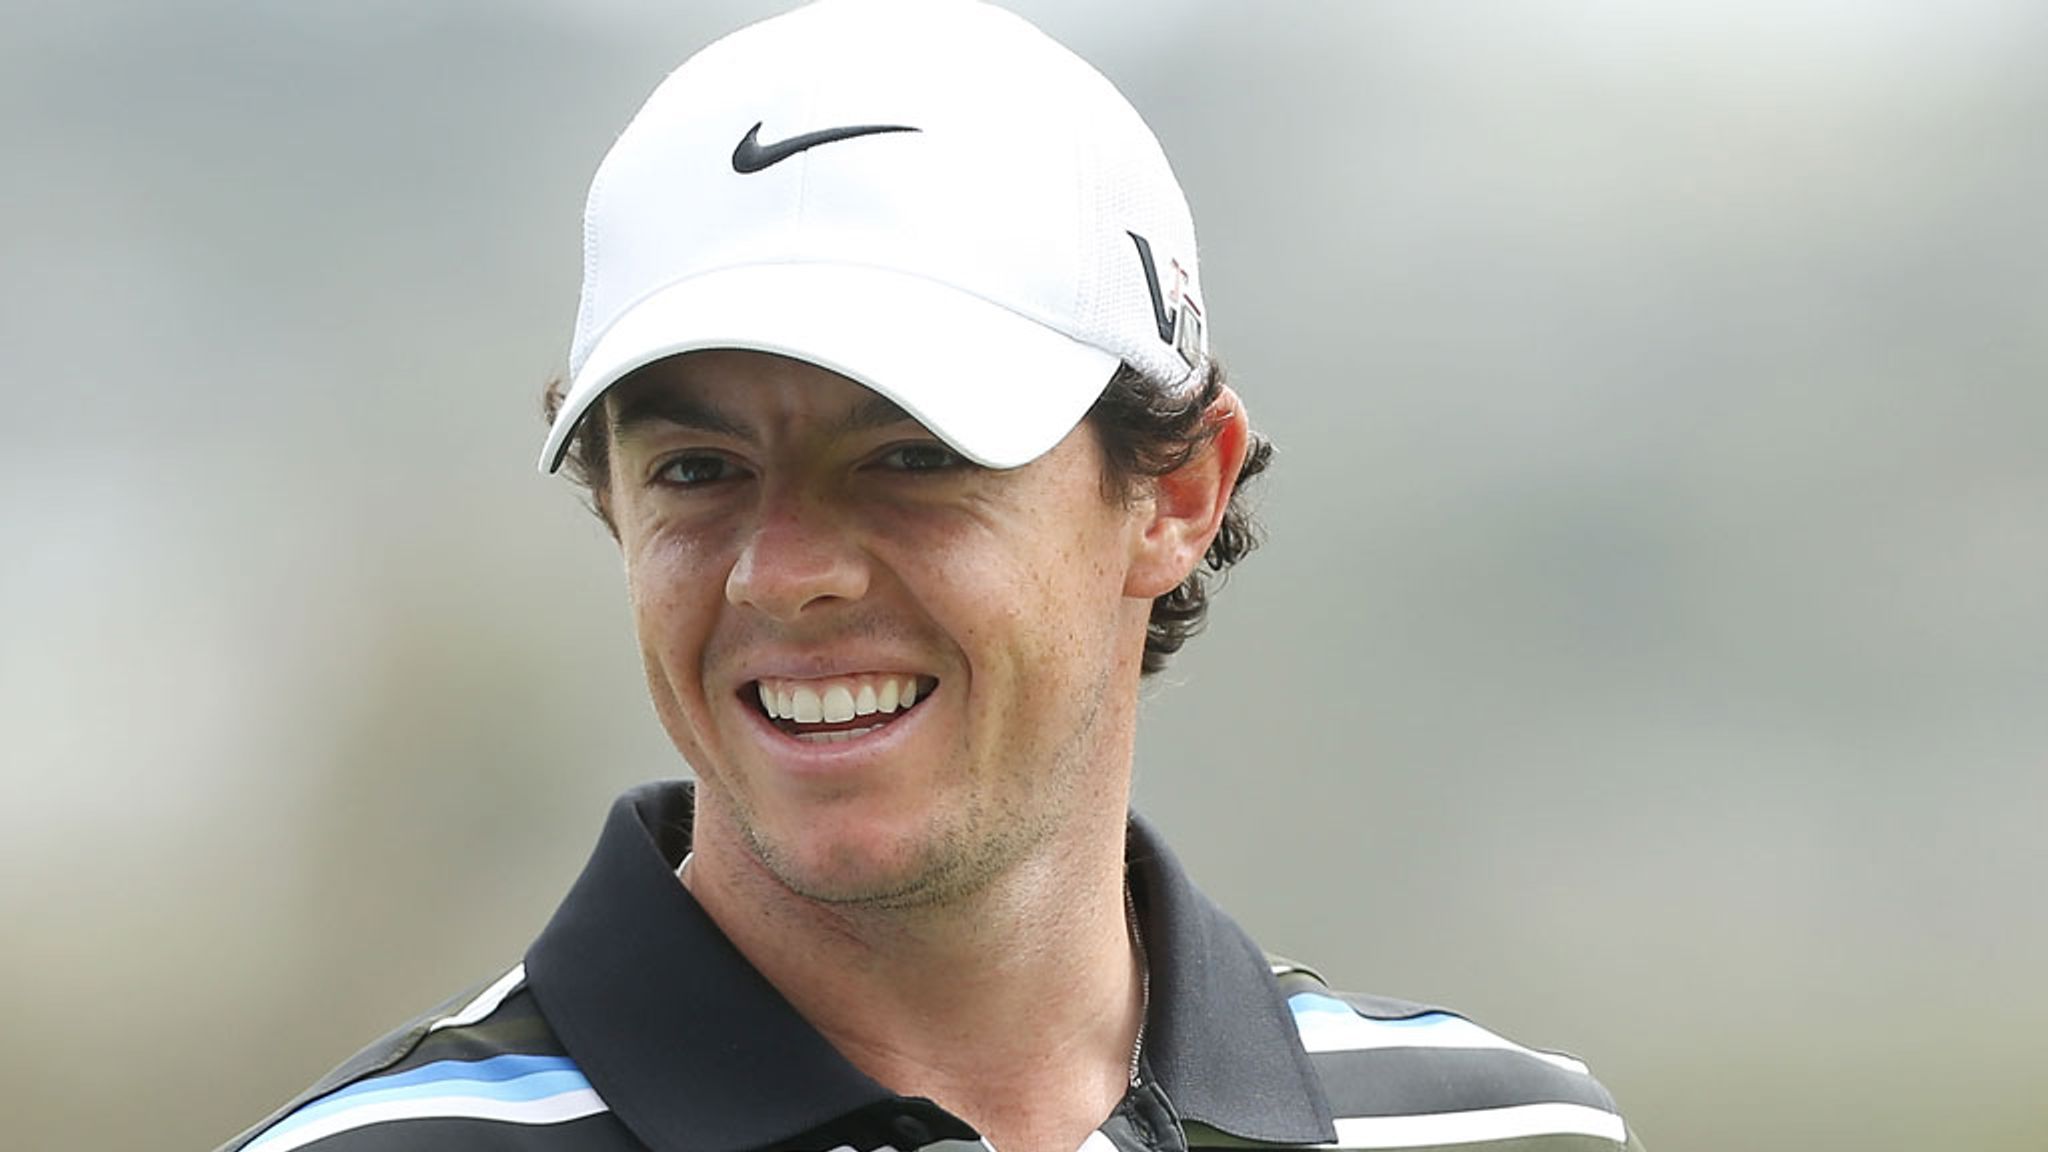 Sky gets McIlroy view on his new Nike for 2014 | Golf News | Sky Sports